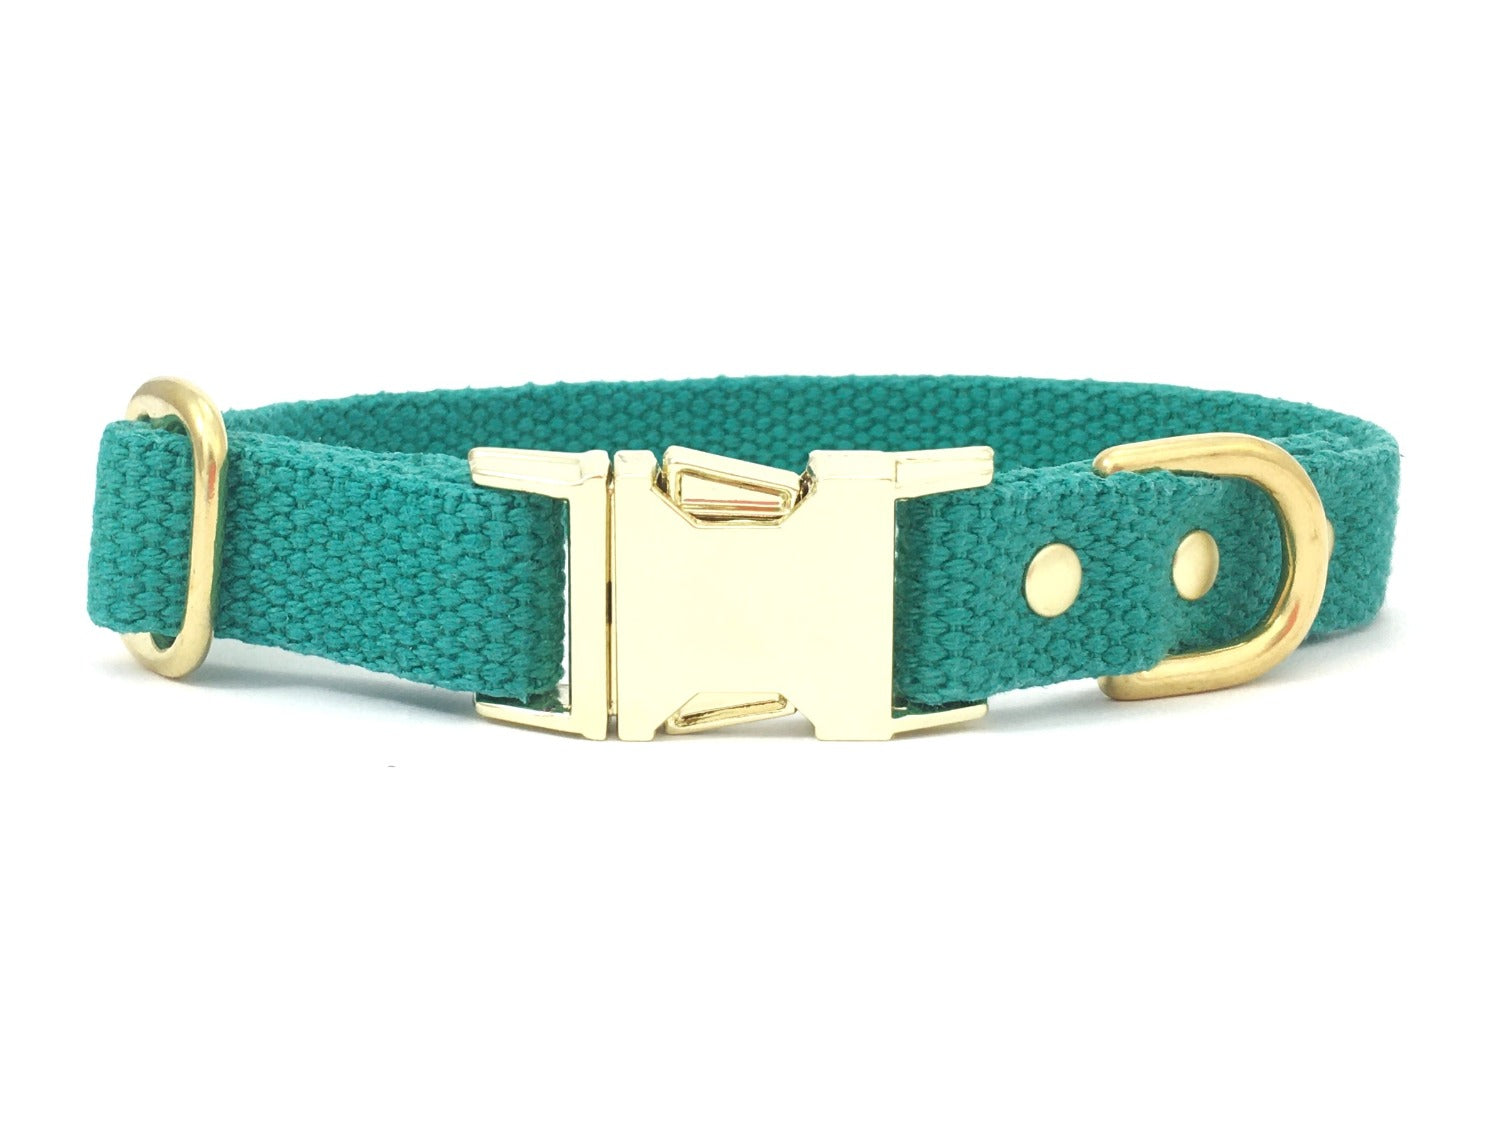 Emerald green dog and puppy collar in natural cotton webbing and luxury brass, handmade in the UK.